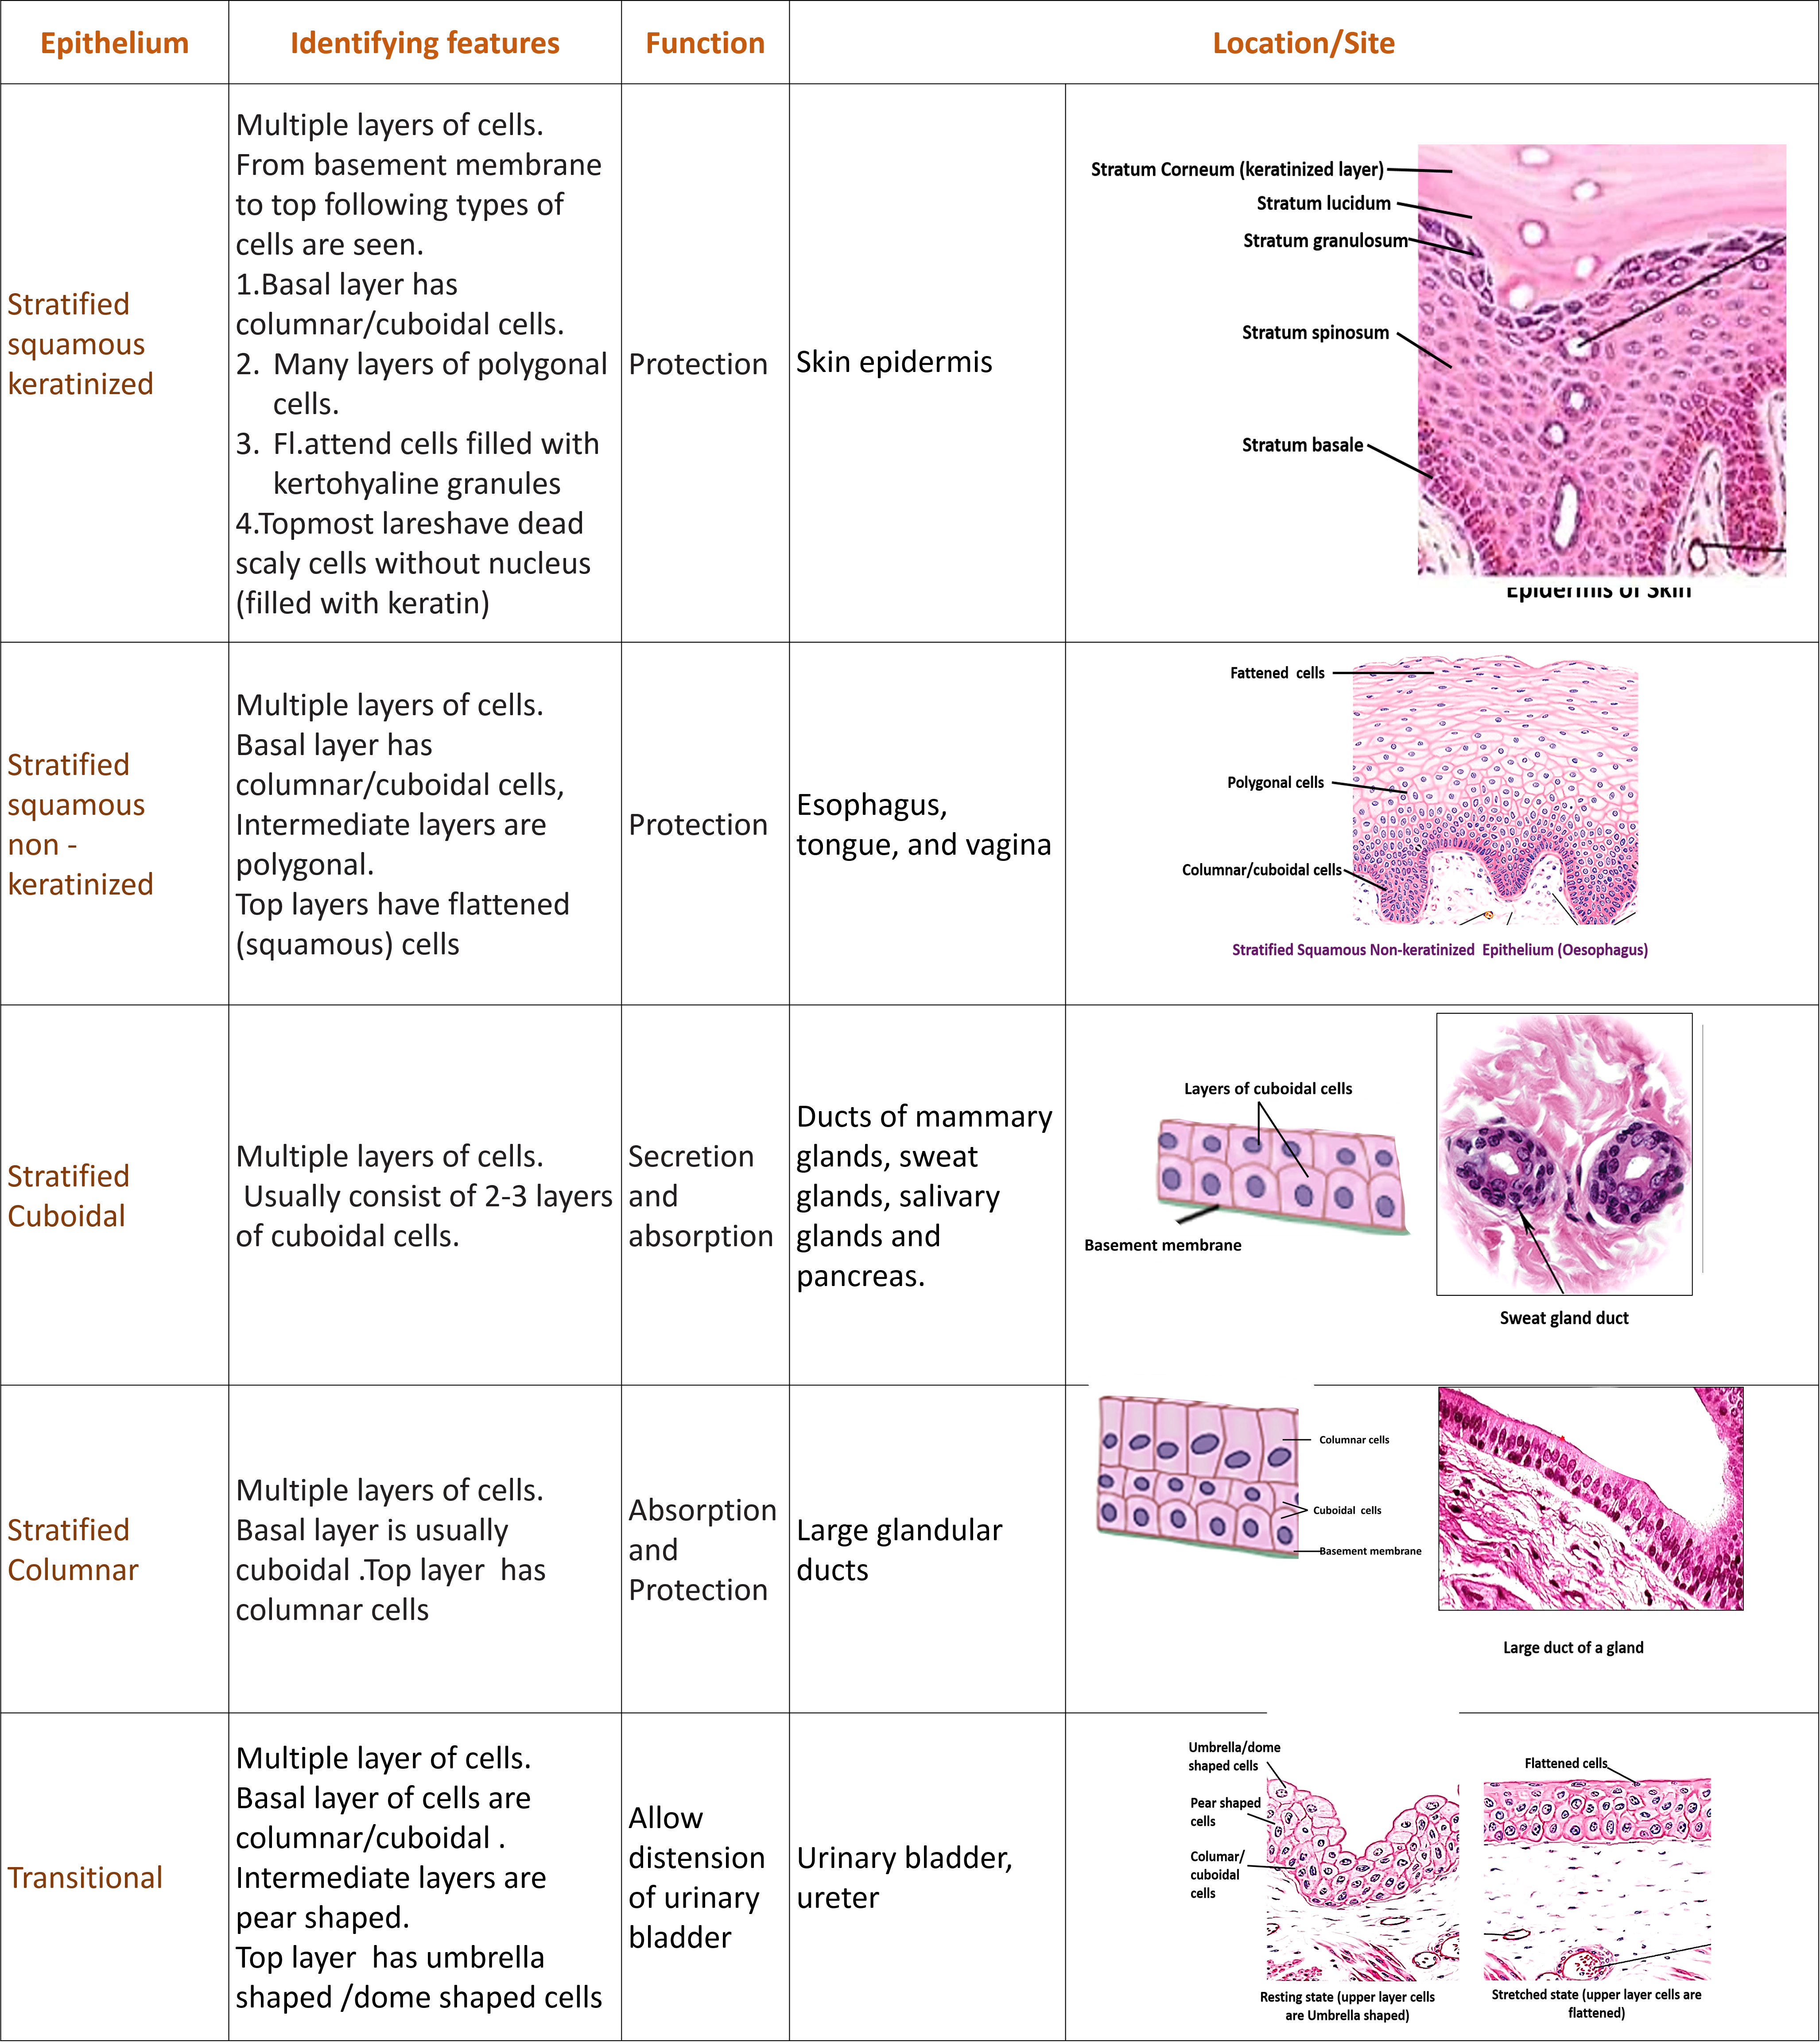 stratified squamous and transitional epithelium, identifying features, functions and location